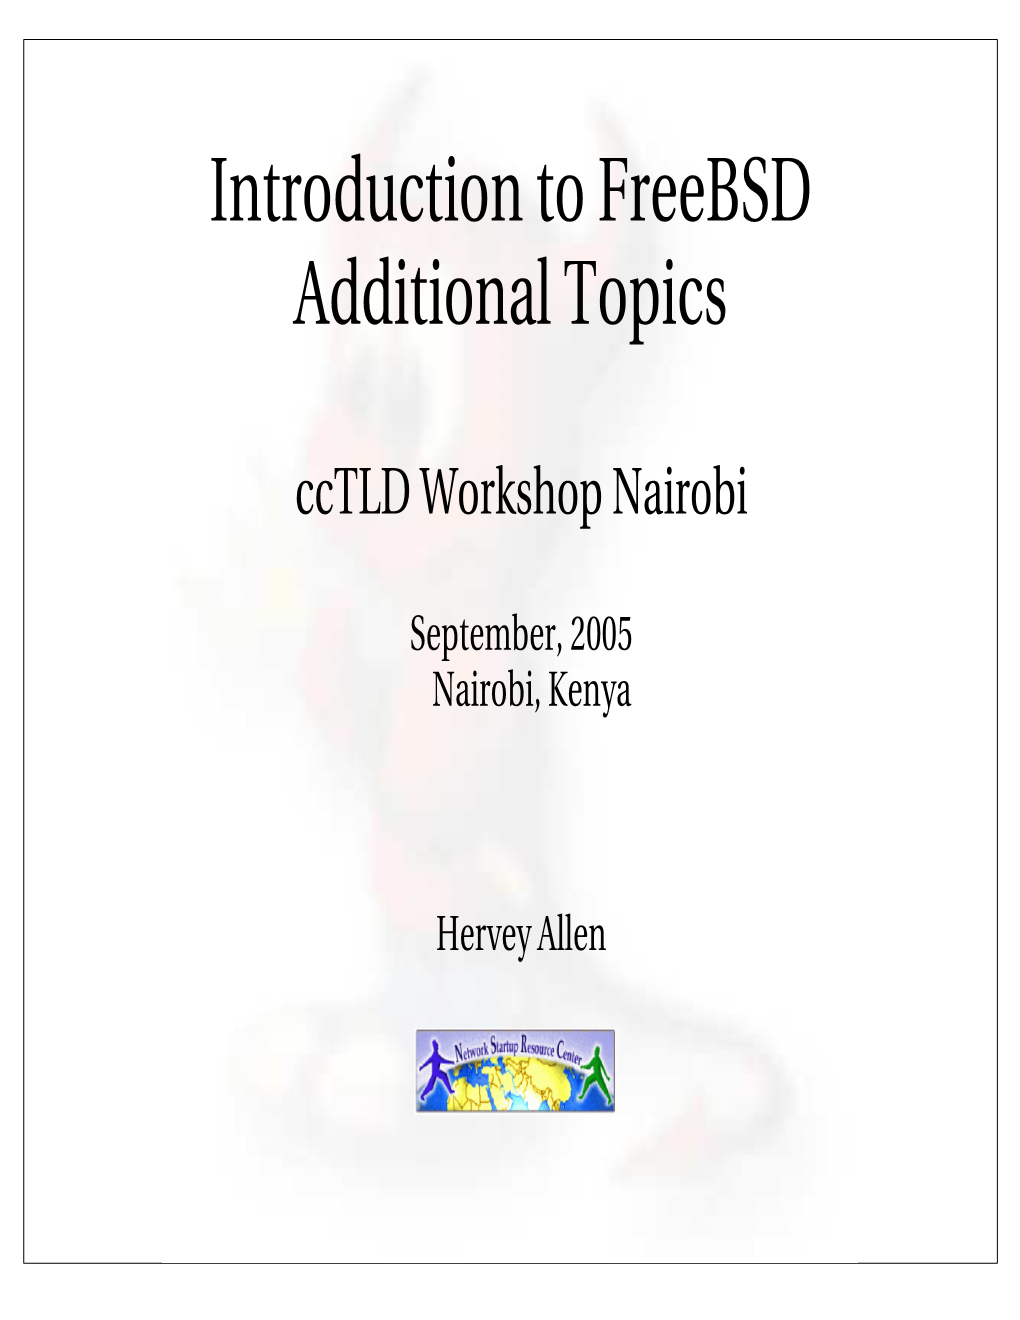 Introduction to Freebsd Additional Topics